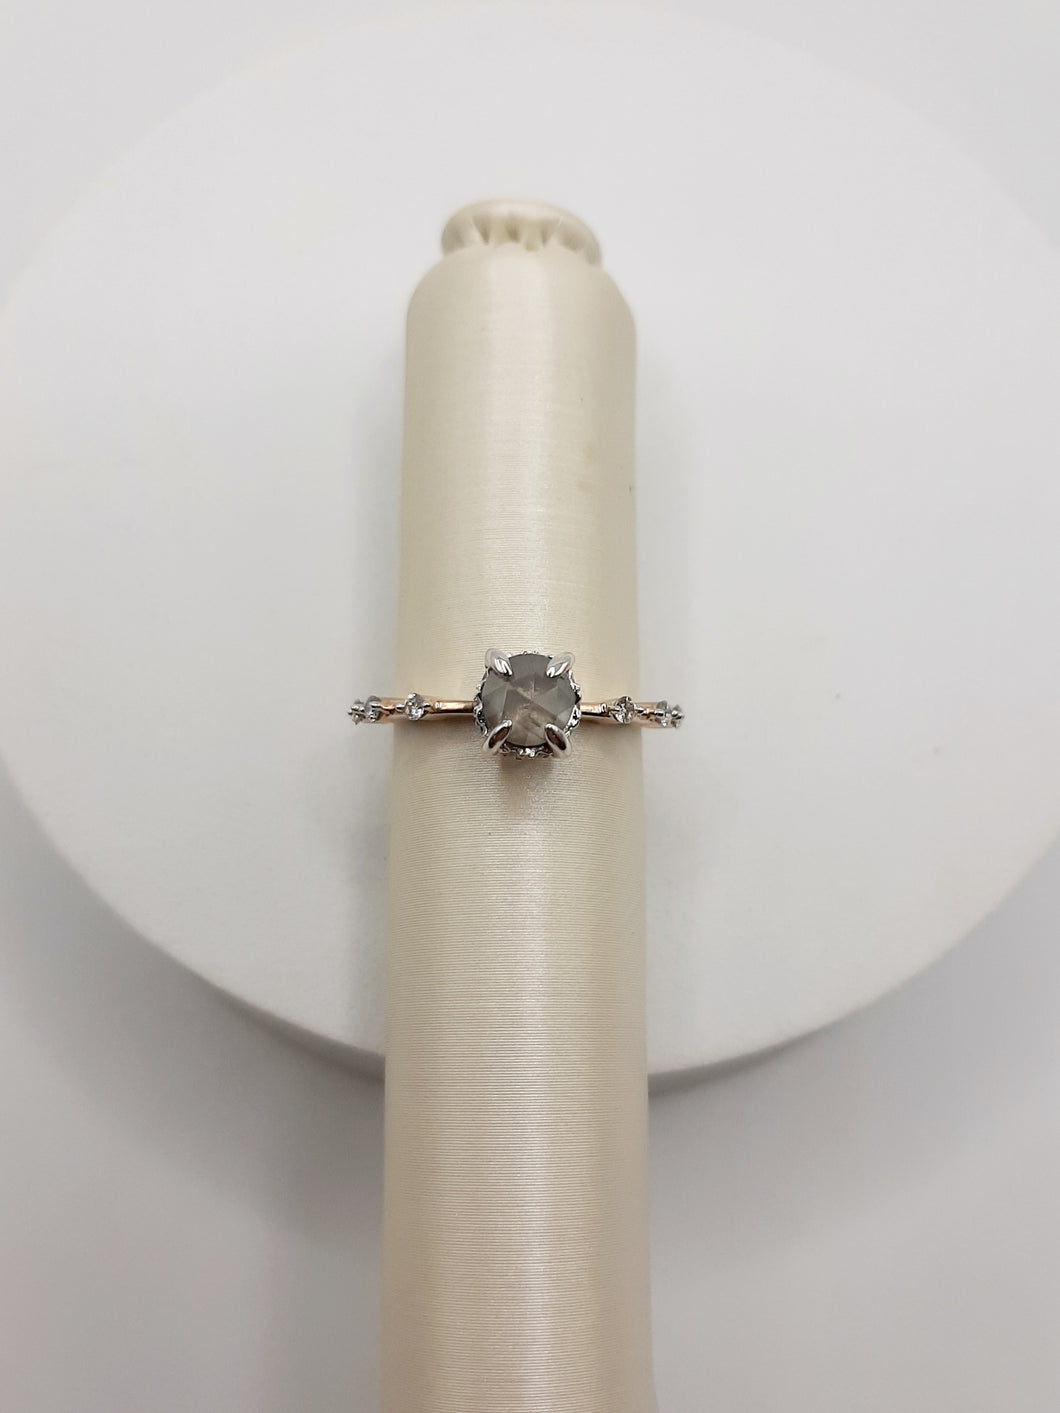 14Kt Rose Gold Natural Diamond Ring Featuring a Salt And Pepper .78 Carats Center Diamond with an Additional .23 Carats of Natural Diamonds Scattered on Band and in Hidden Halo